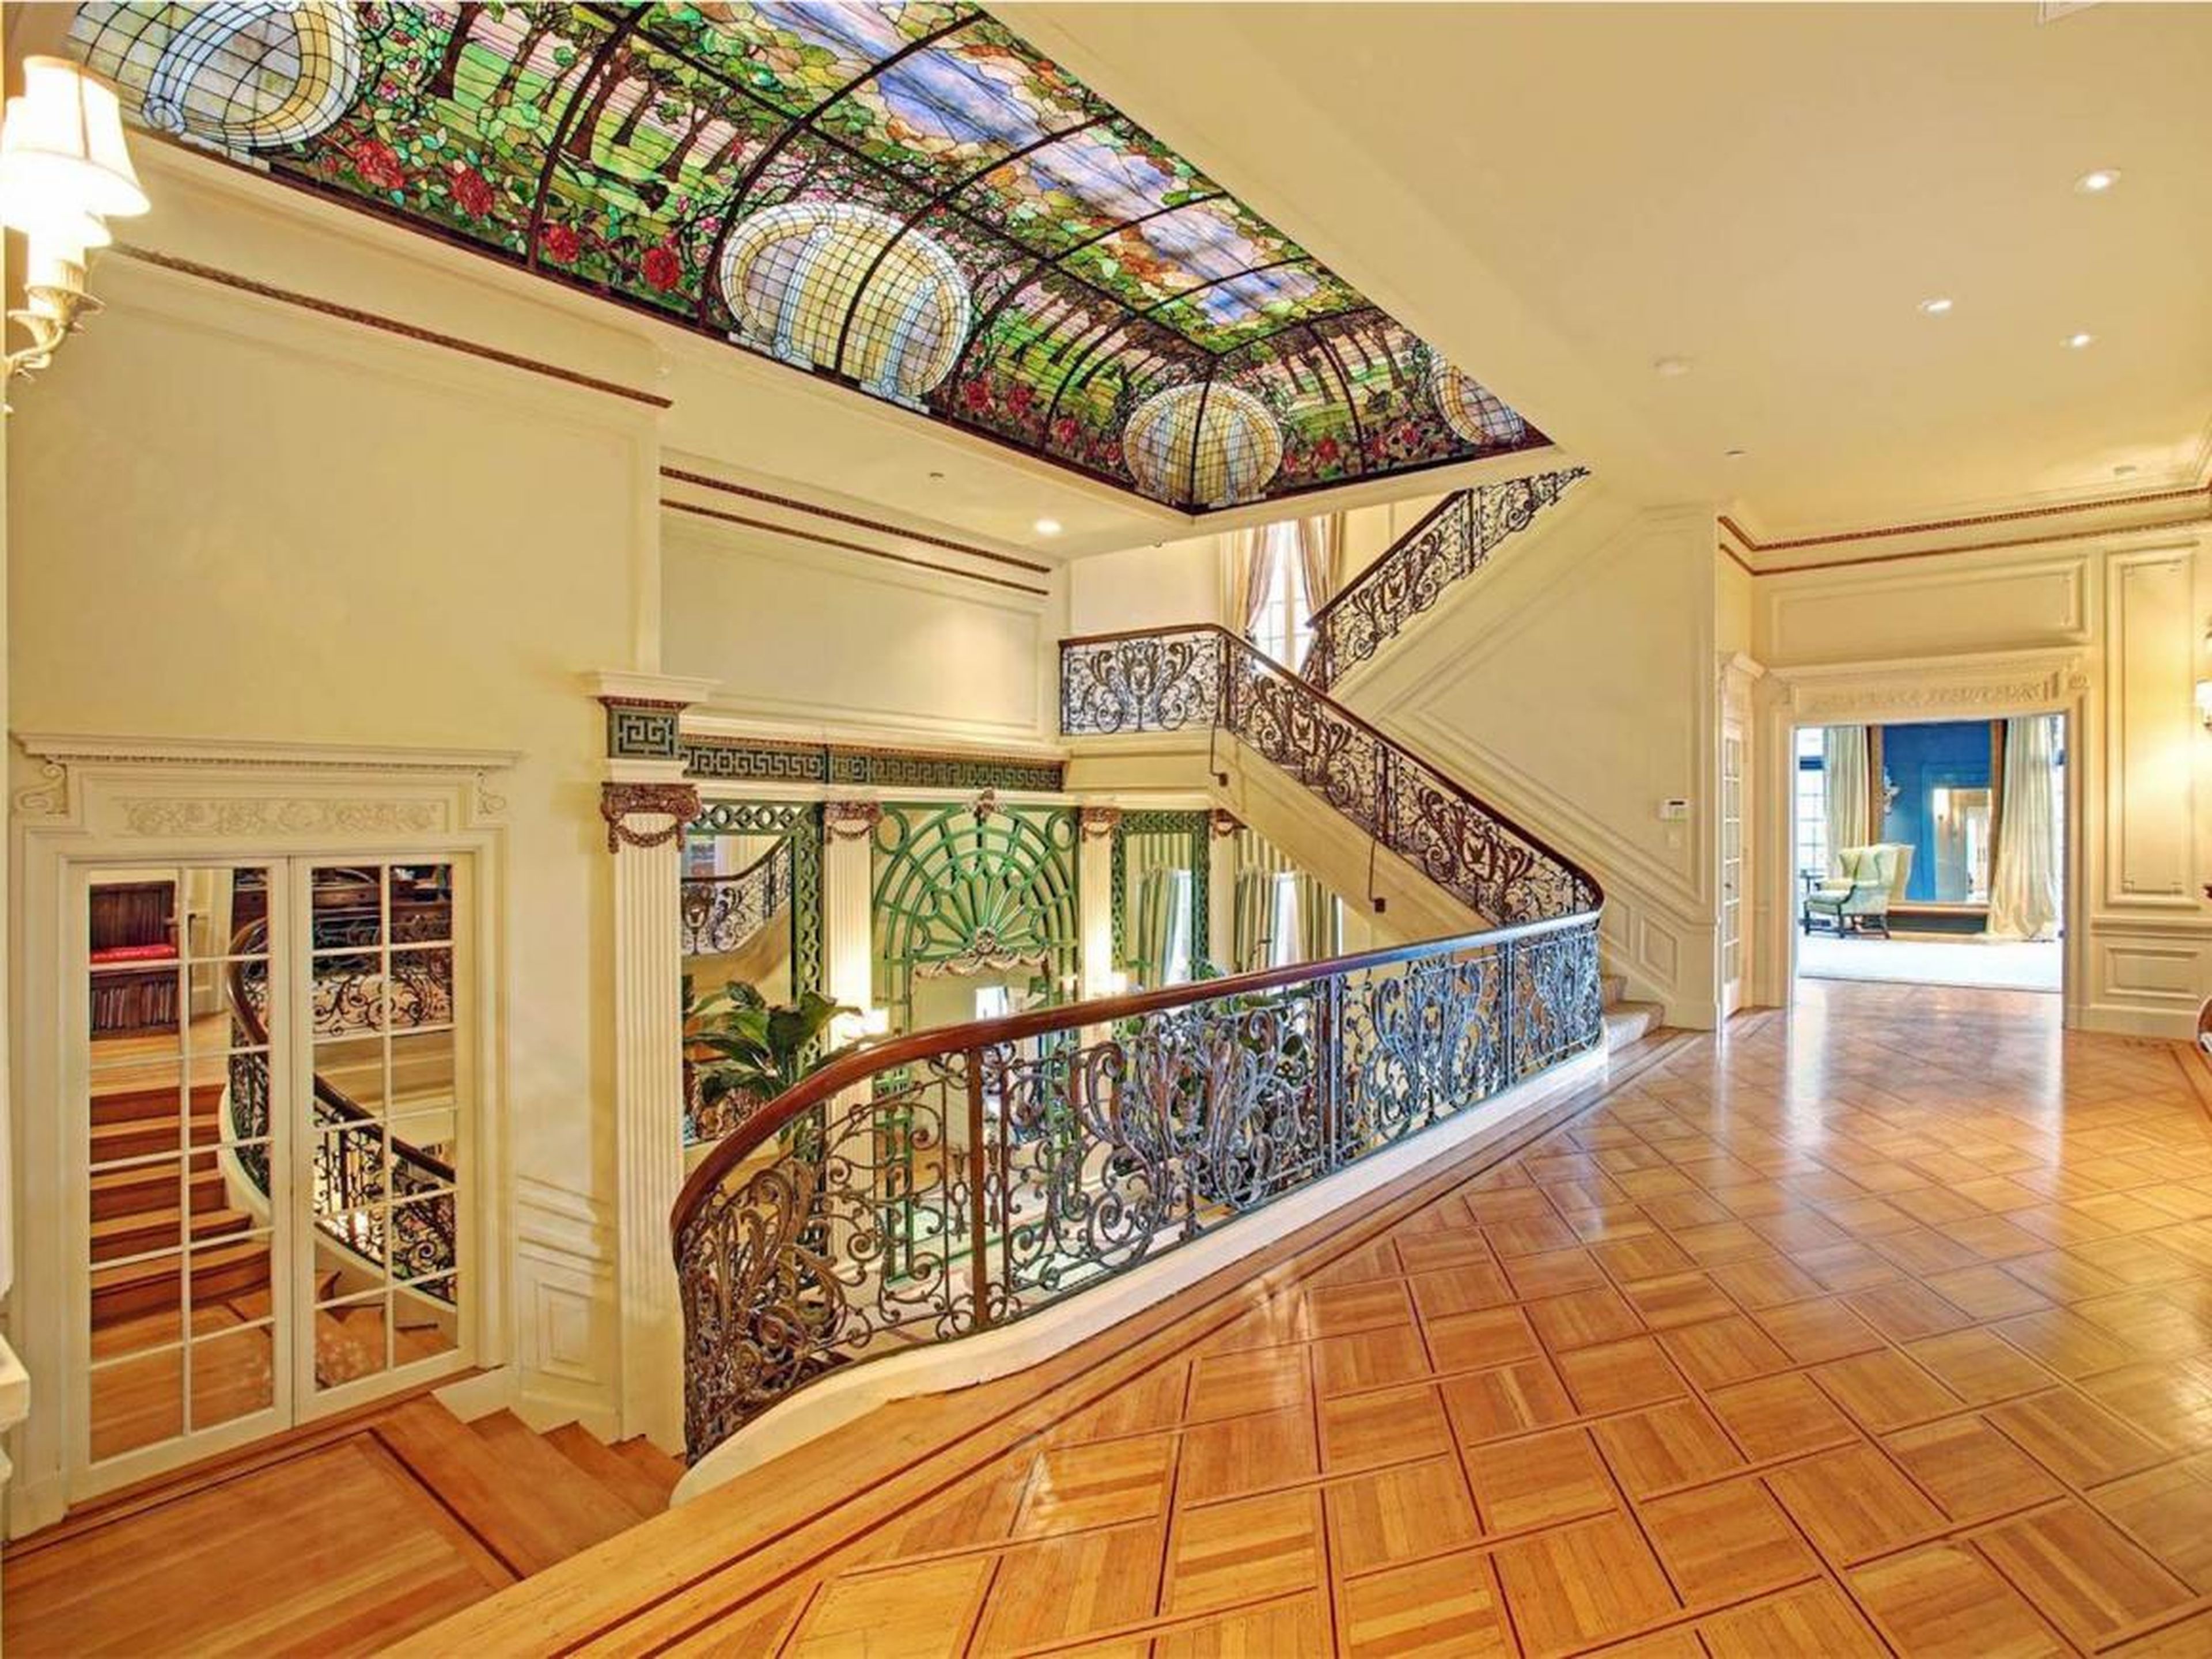 The home was chosen for the 2008 San Francisco Decorator Showcase, which saw the city's top designers swoop into the property and transform each room into a masterpiece. Only 42 San Francisco homes bear that designation.